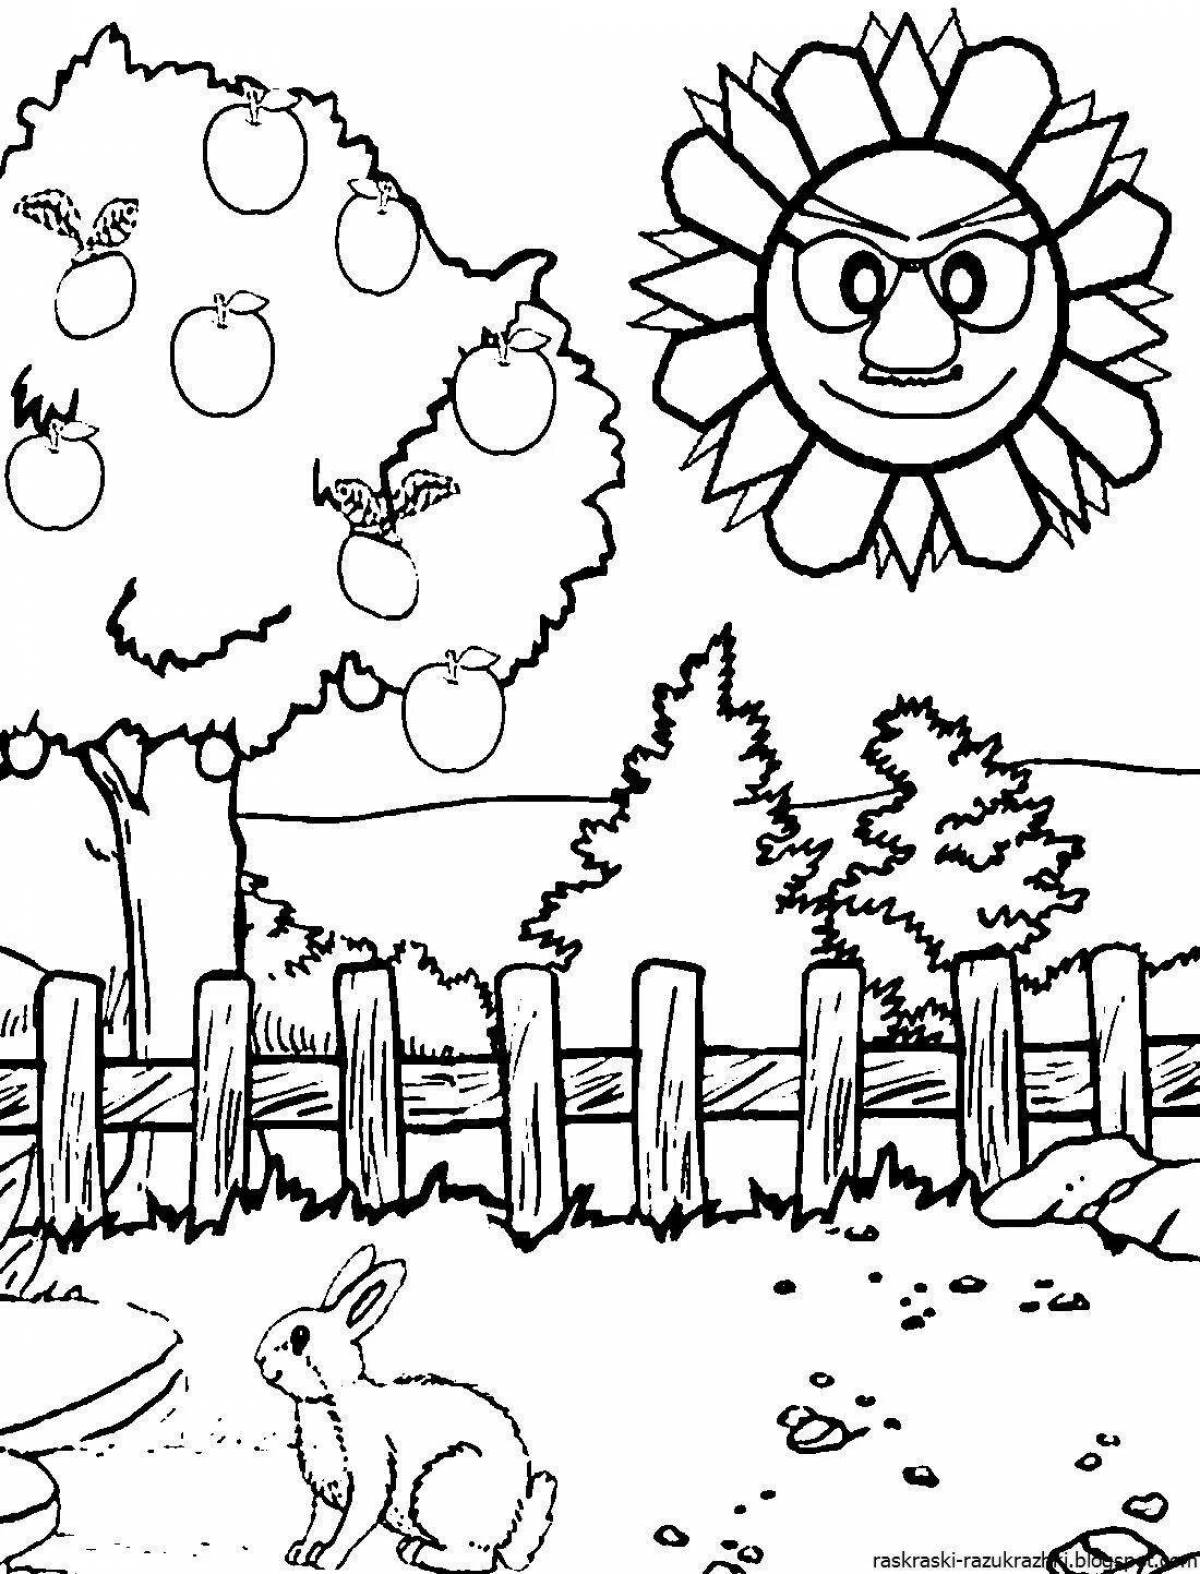 Crazy nature coloring for 10 year olds